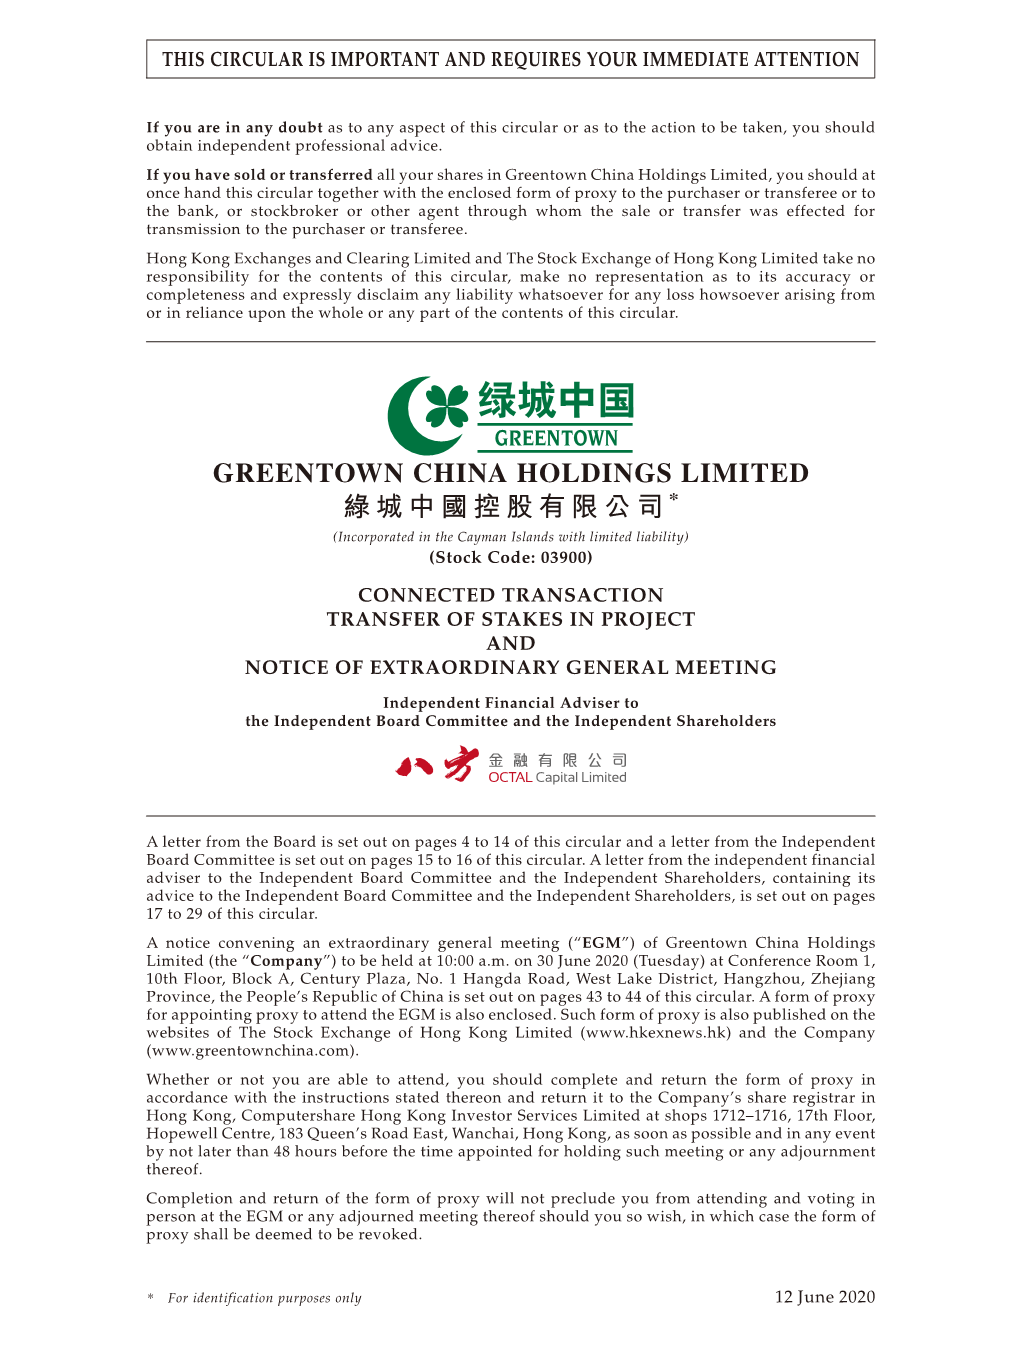 GREENTOWN CHINA HOLDINGS LIMITED 綠城中國控股有限公司* (Incorporated in the Cayman Islands with Limited Liability) (Stock Code: 03900)